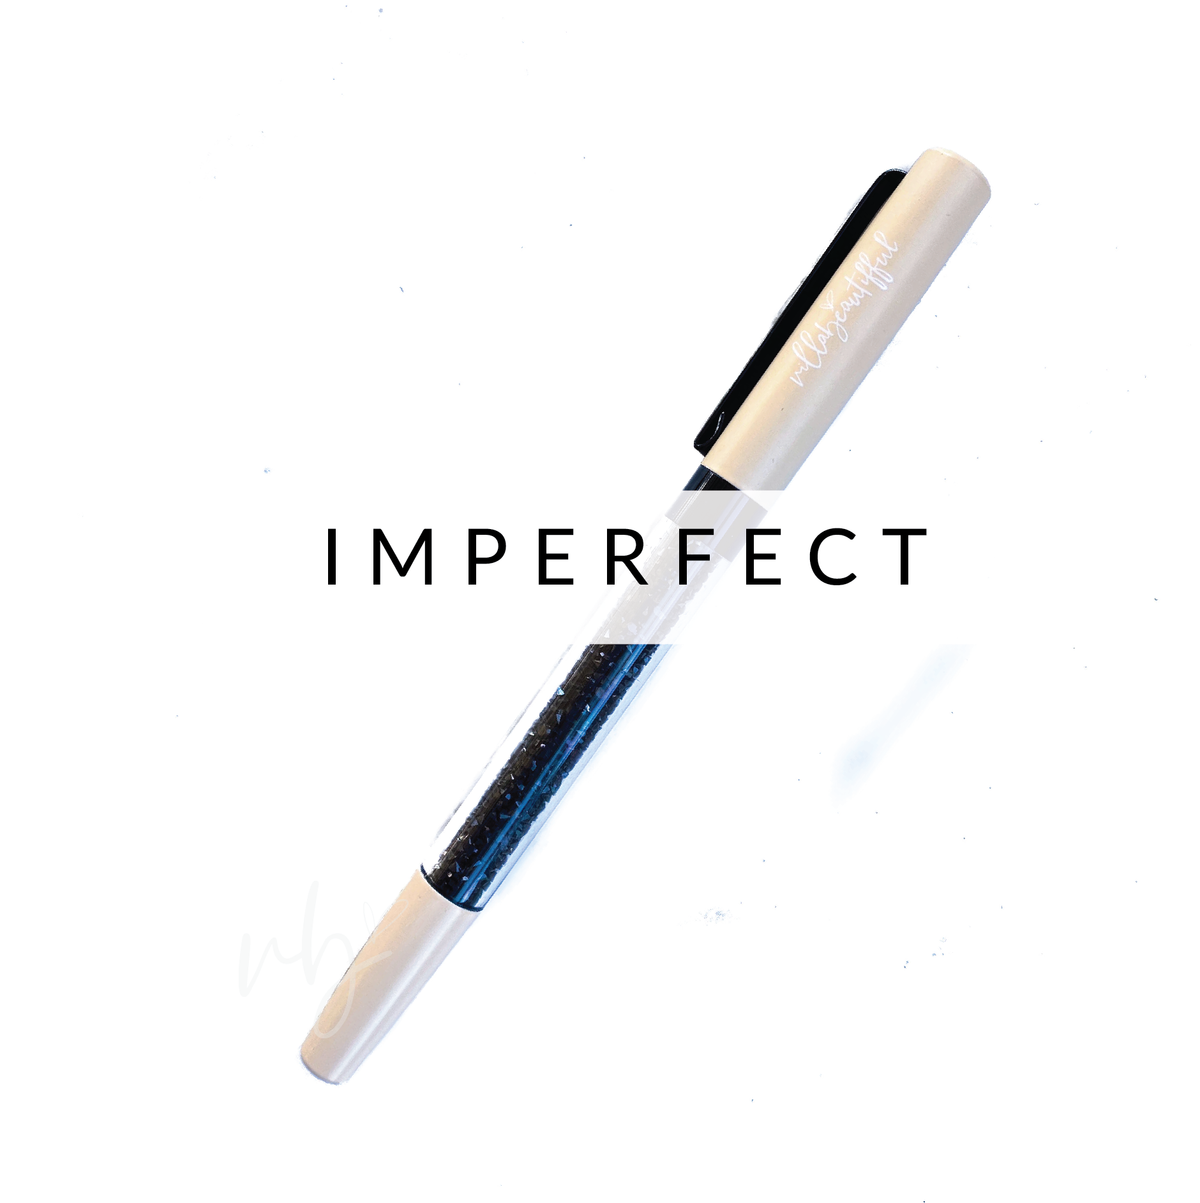 Serenity IMPERFECT Crystal VBPen | limited kit pen